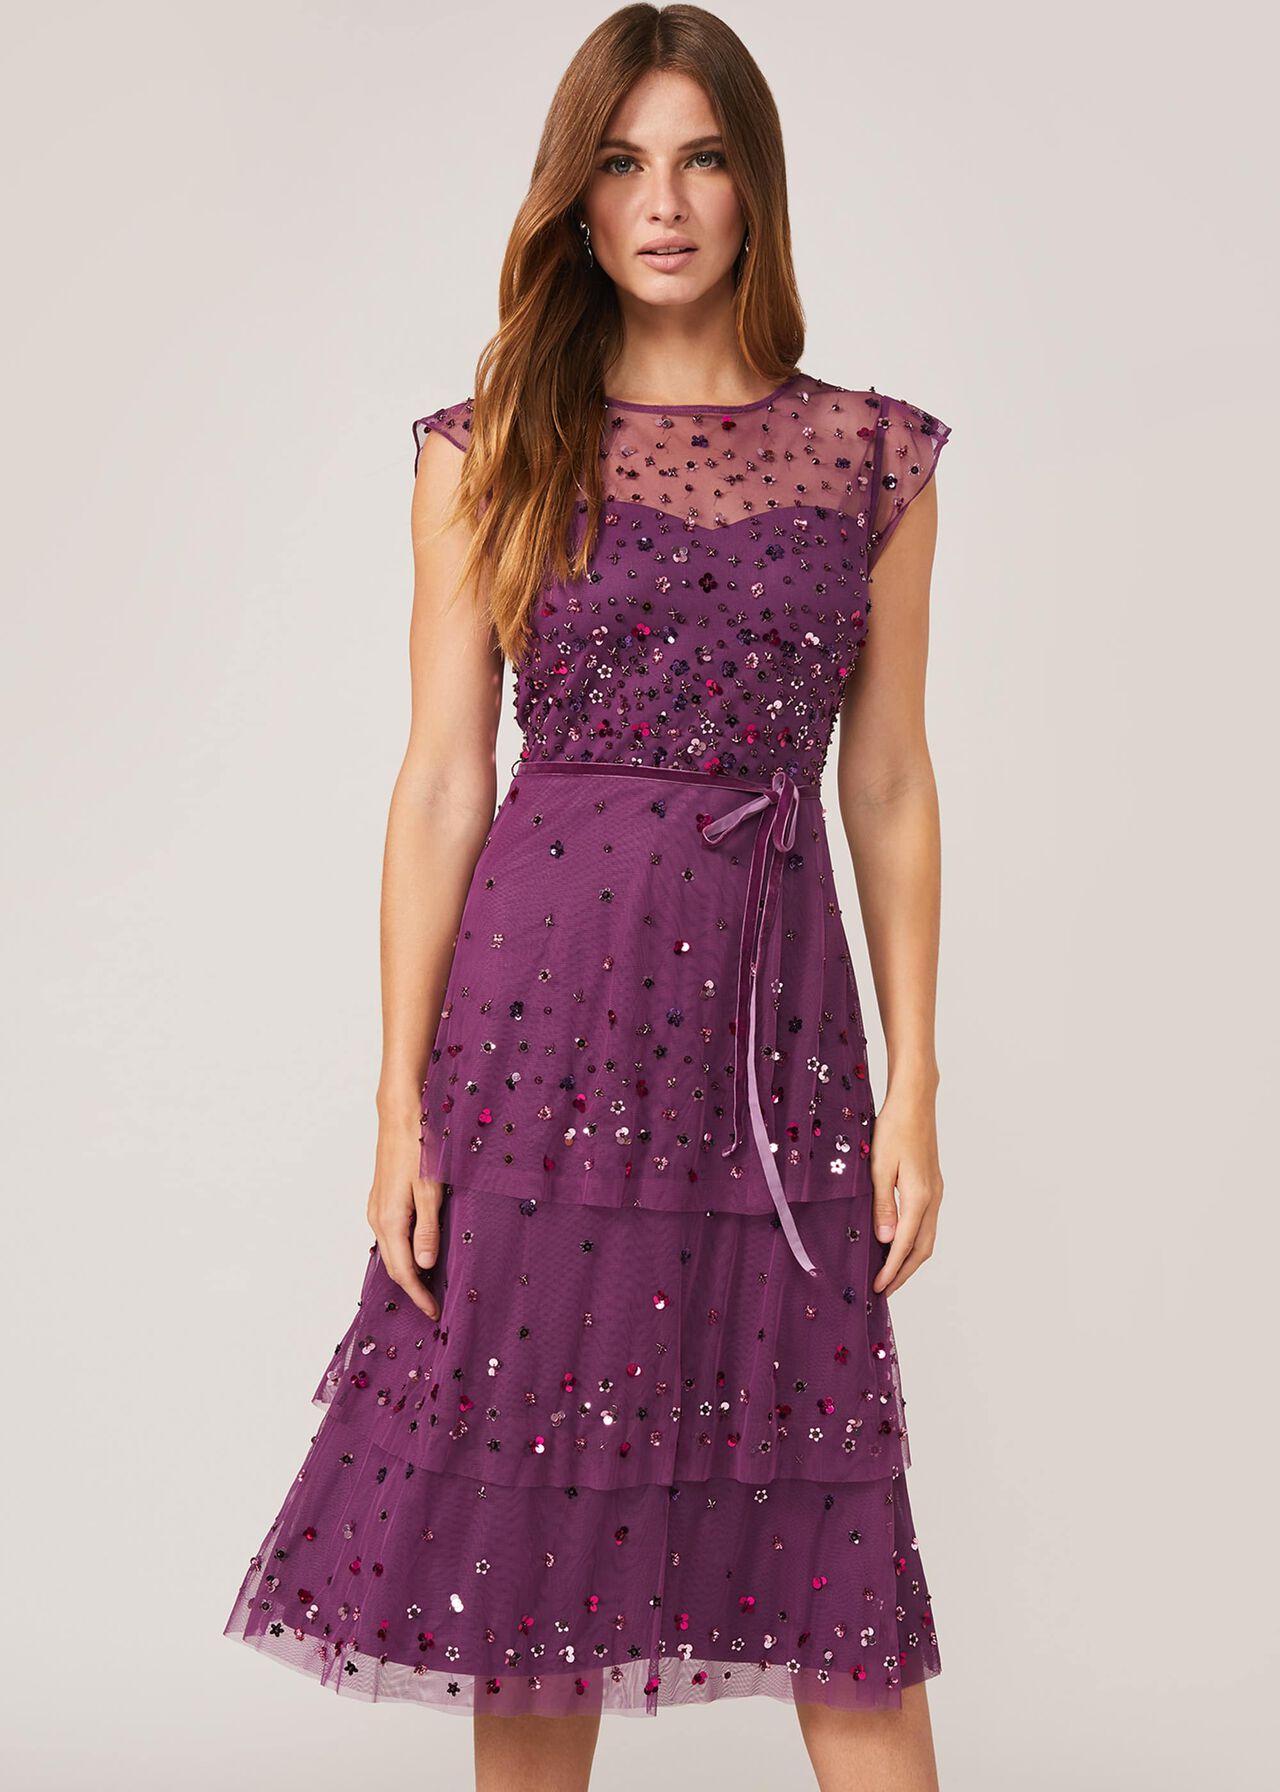 Cortine Embellished Tiered Dress | Phase Eight